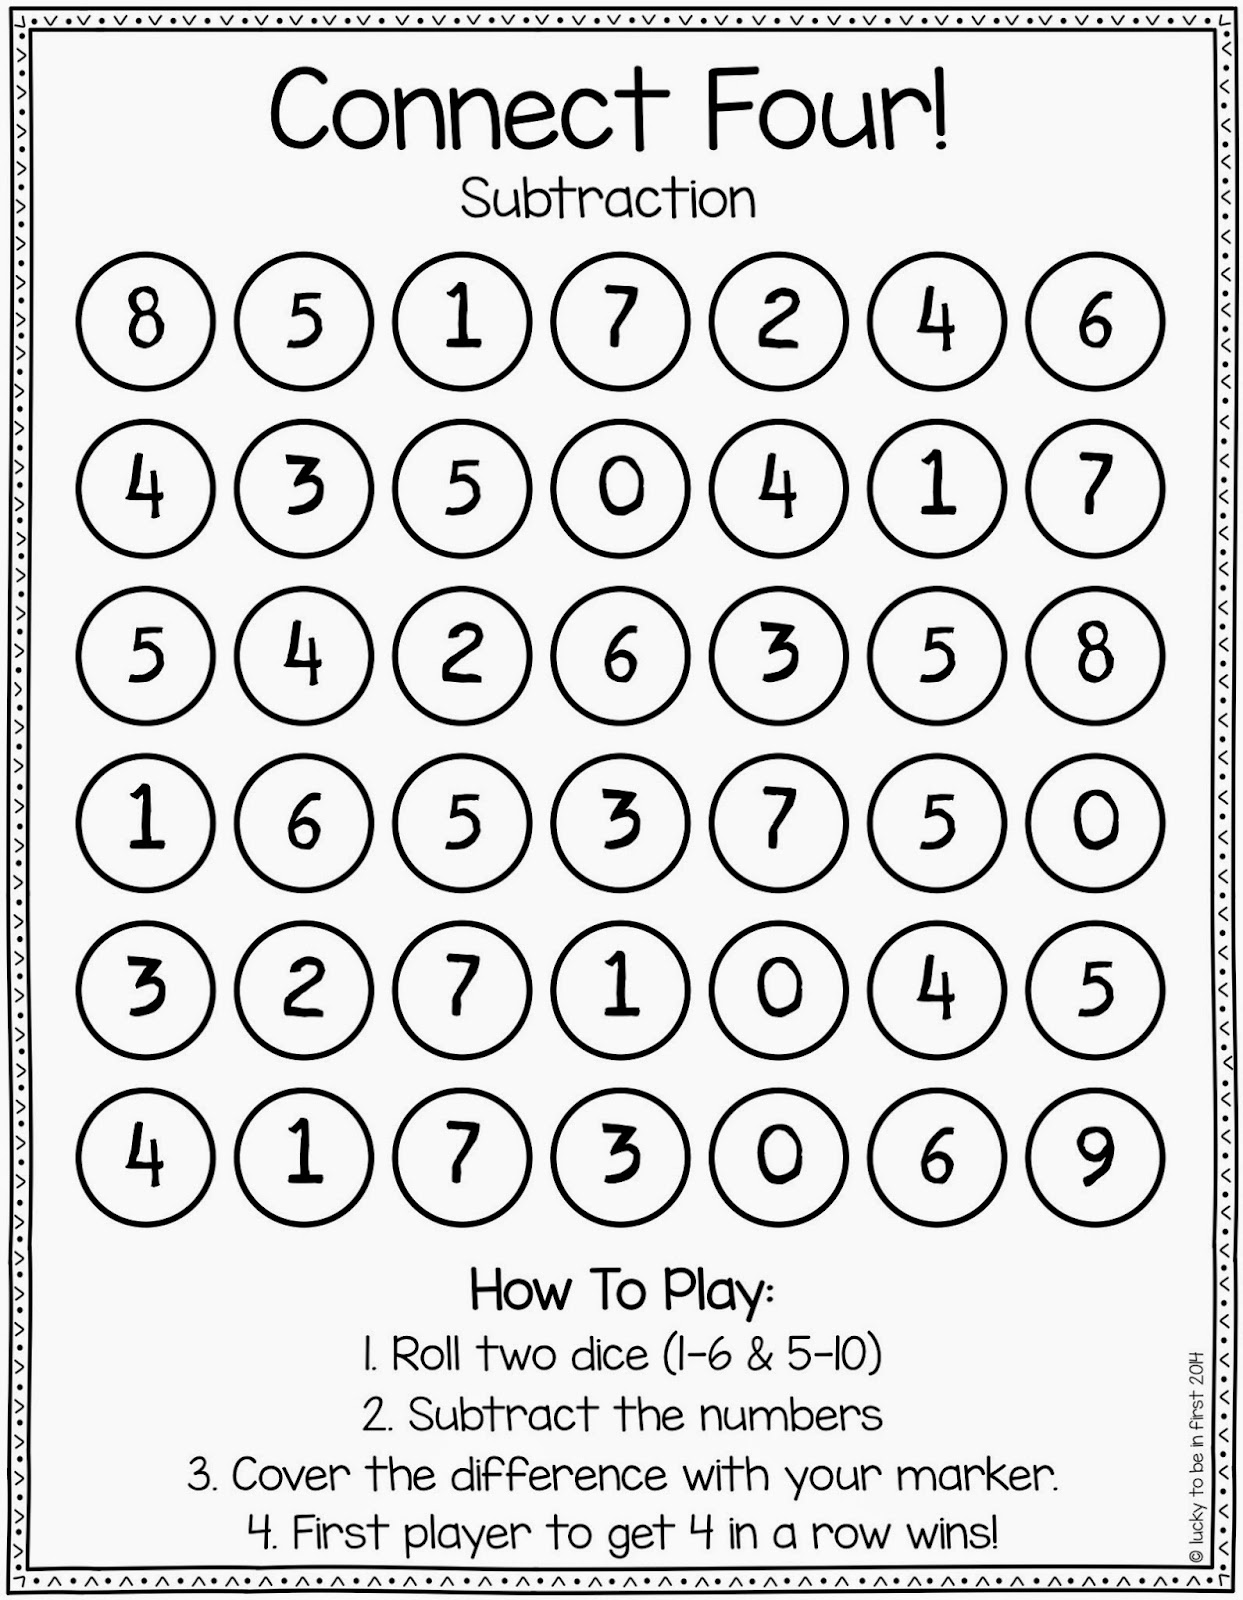 connect four subtraction math game printout | Lucky Learning with Molly Lynch 